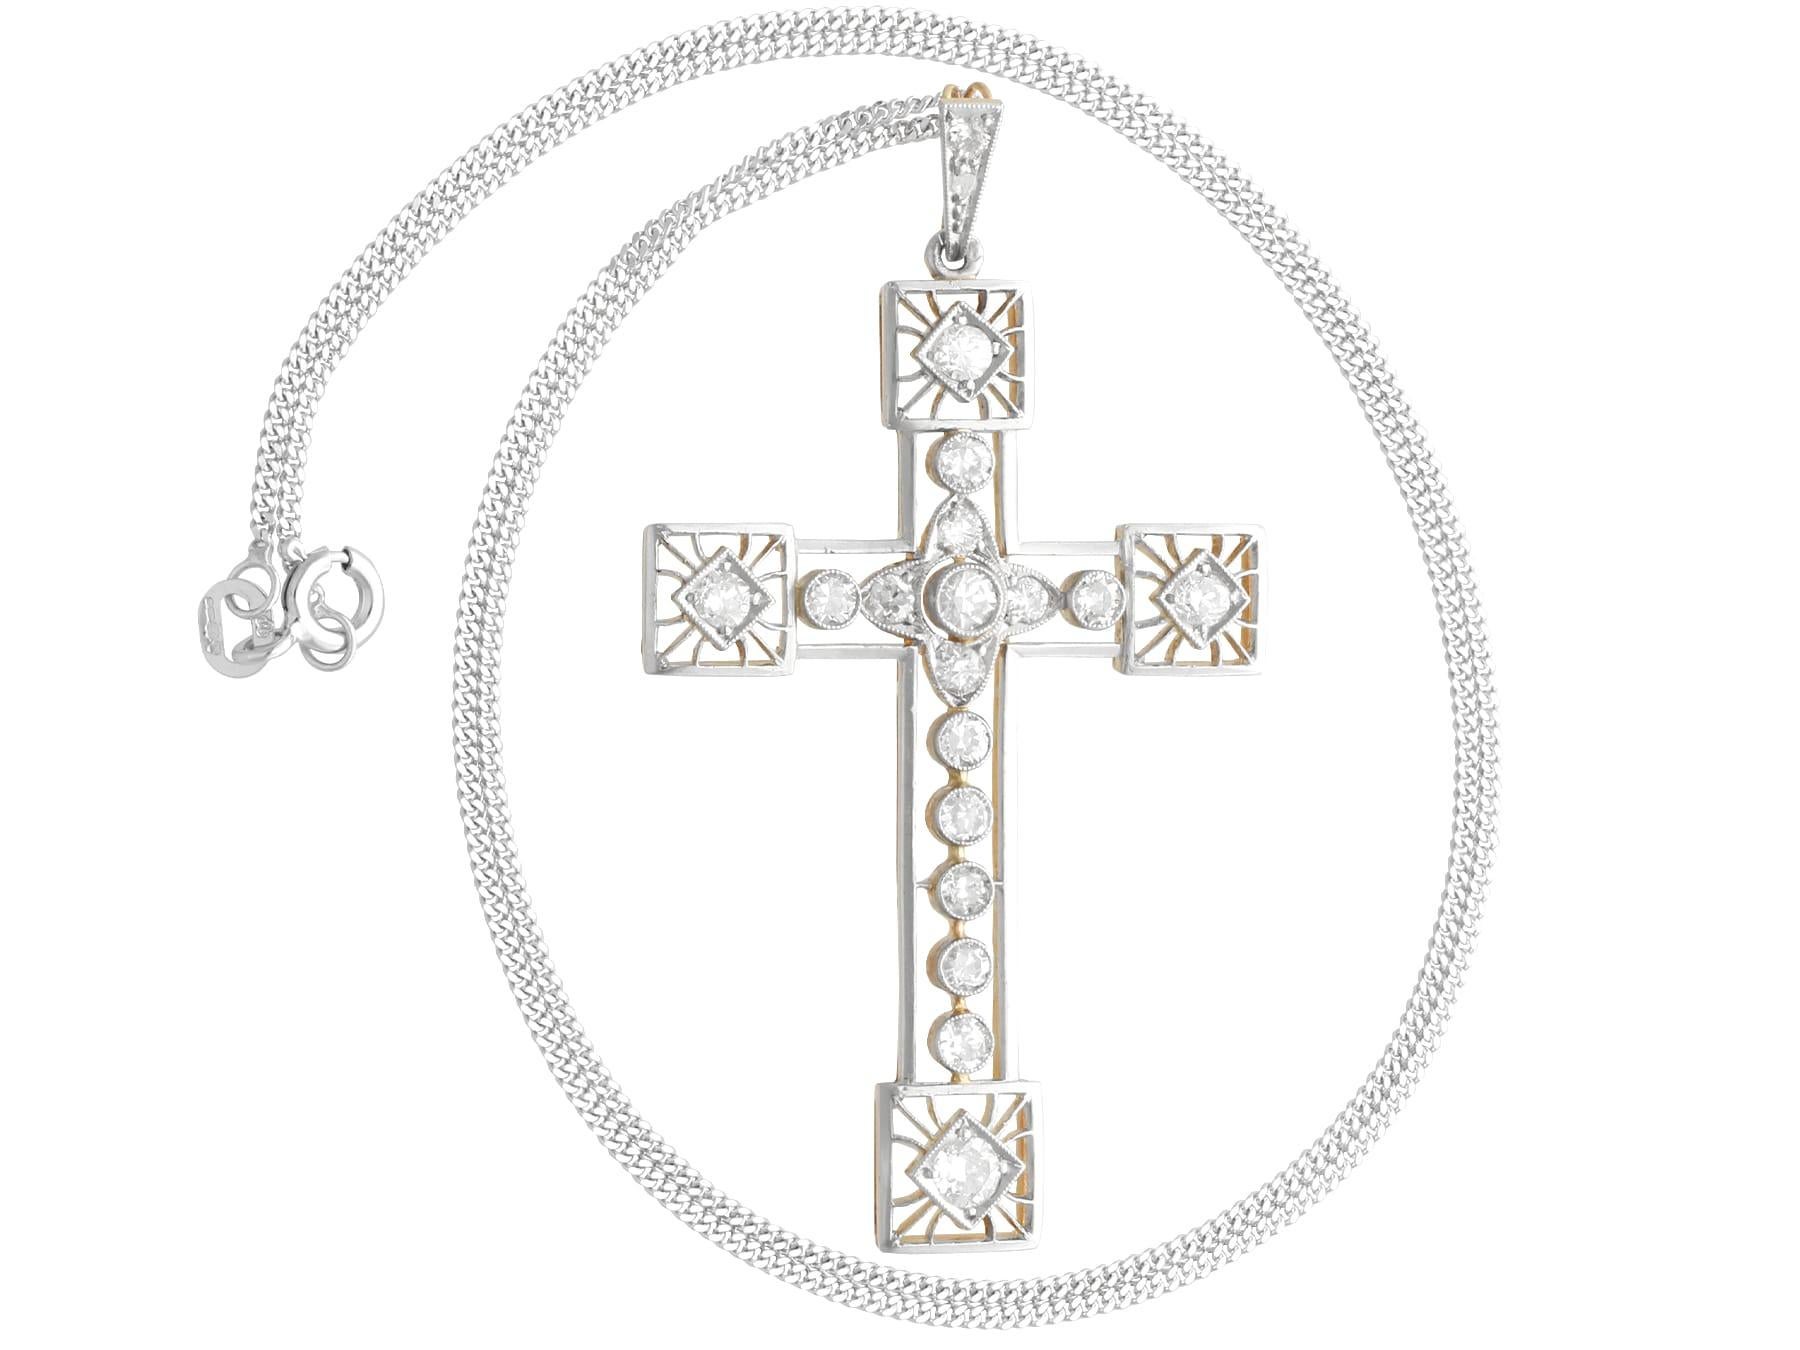 Antique 1.60ct Diamond and 18k Yellow Gold Cross Pendant In Excellent Condition For Sale In Jesmond, Newcastle Upon Tyne